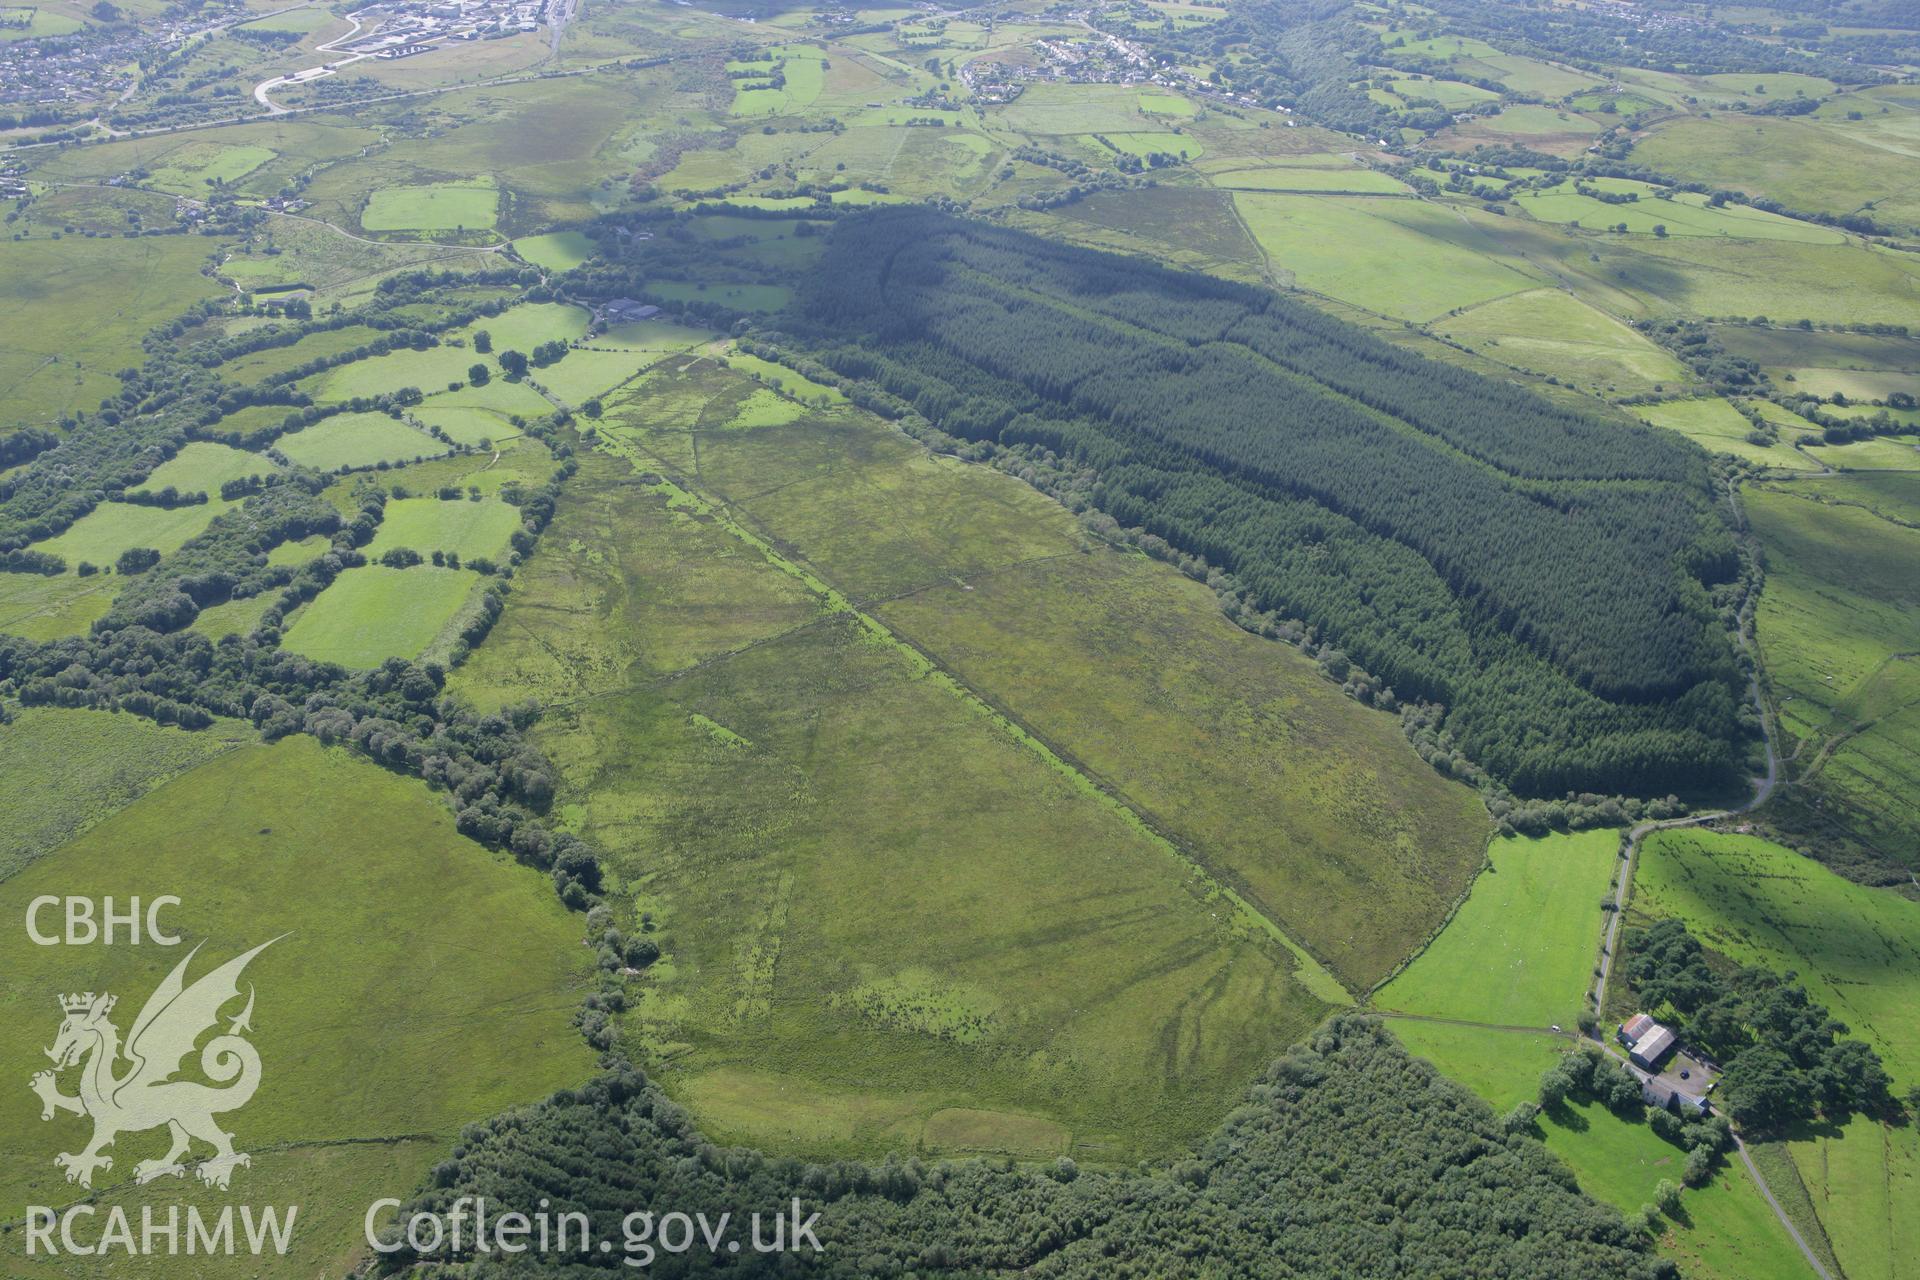 RCAHMW colour oblique aerial photograph of a section of Sarn Helen Roman Road northeast of Coelbren Fort. Taken on 30 July 2007 by Toby Driver